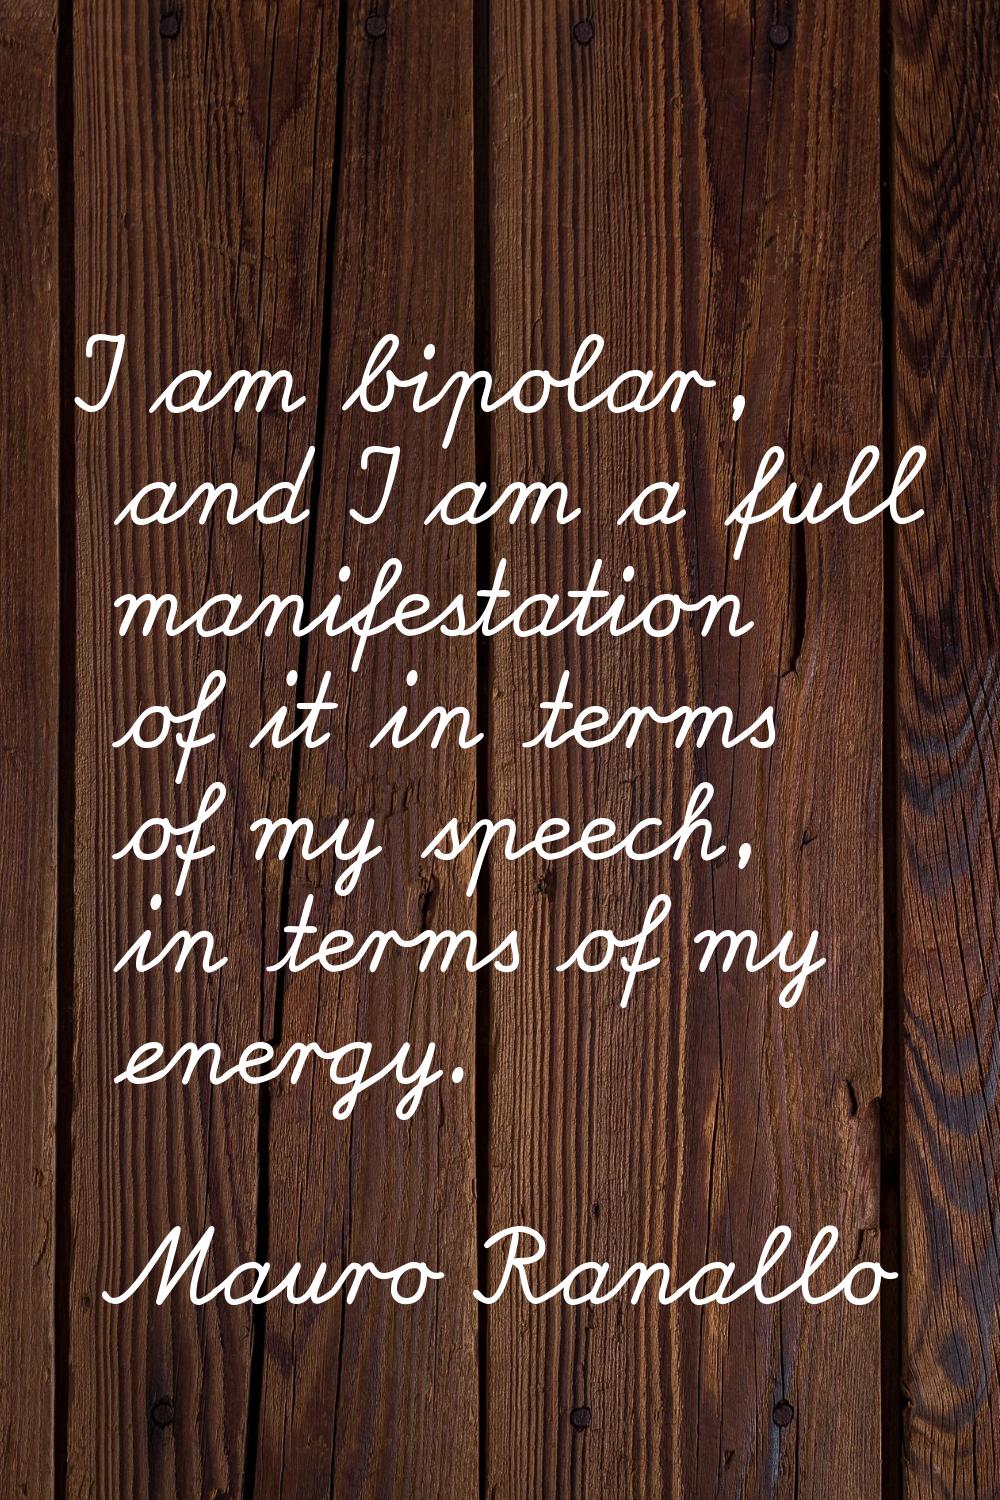 I am bipolar, and I am a full manifestation of it in terms of my speech, in terms of my energy.